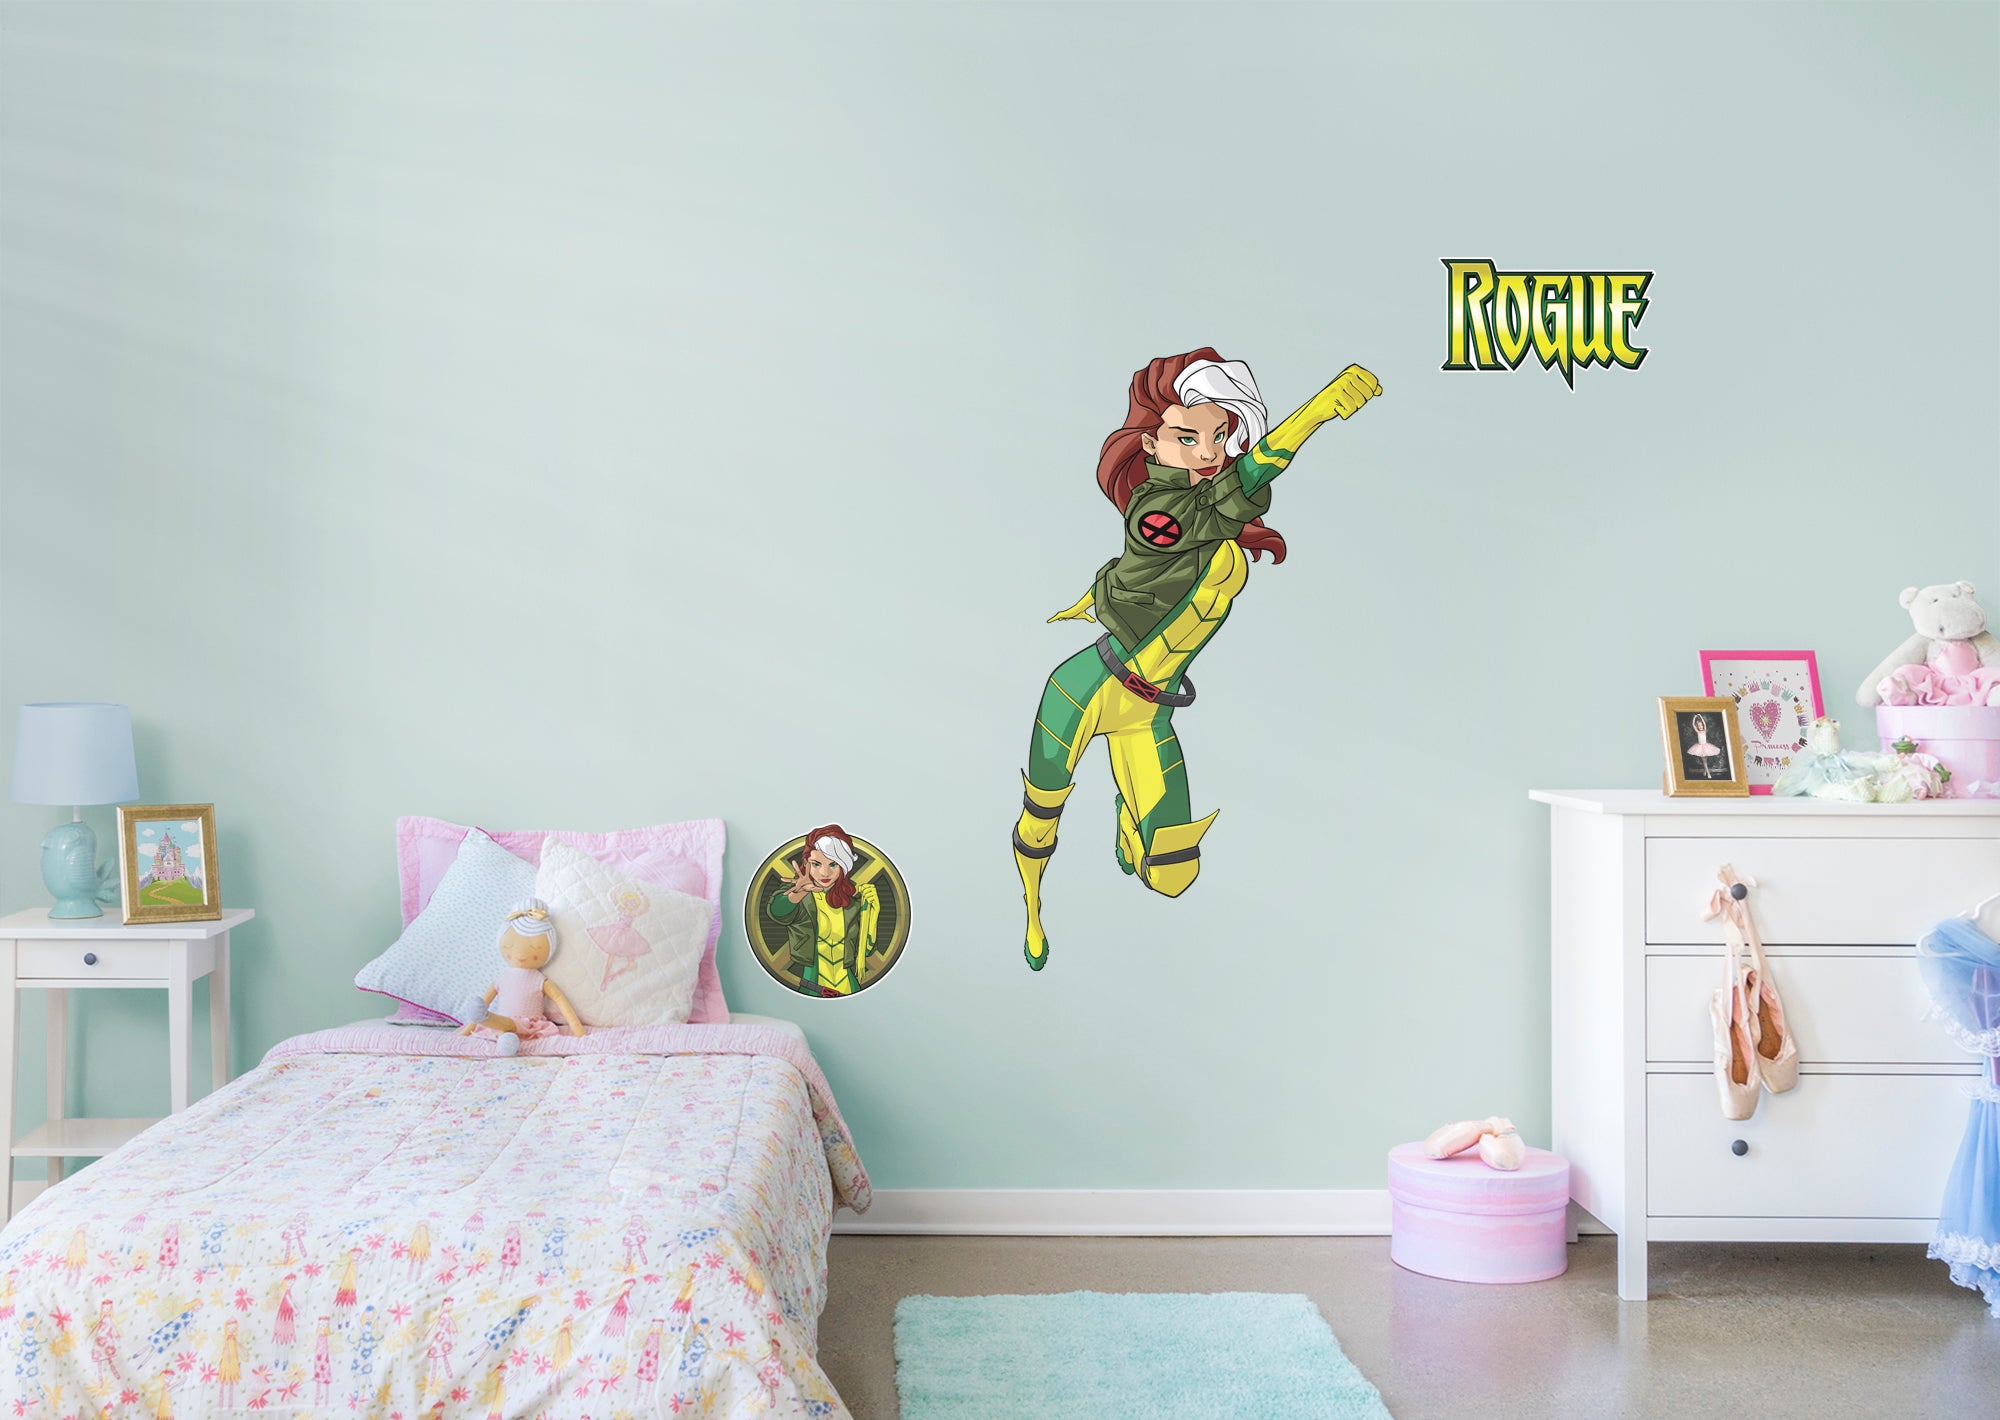 X-Men Rogue RealBig - Officially Licensed Marvel Removable Wall Decal Giant Character + 2 Decals (30"W x 51"H) by Fathead | Viny